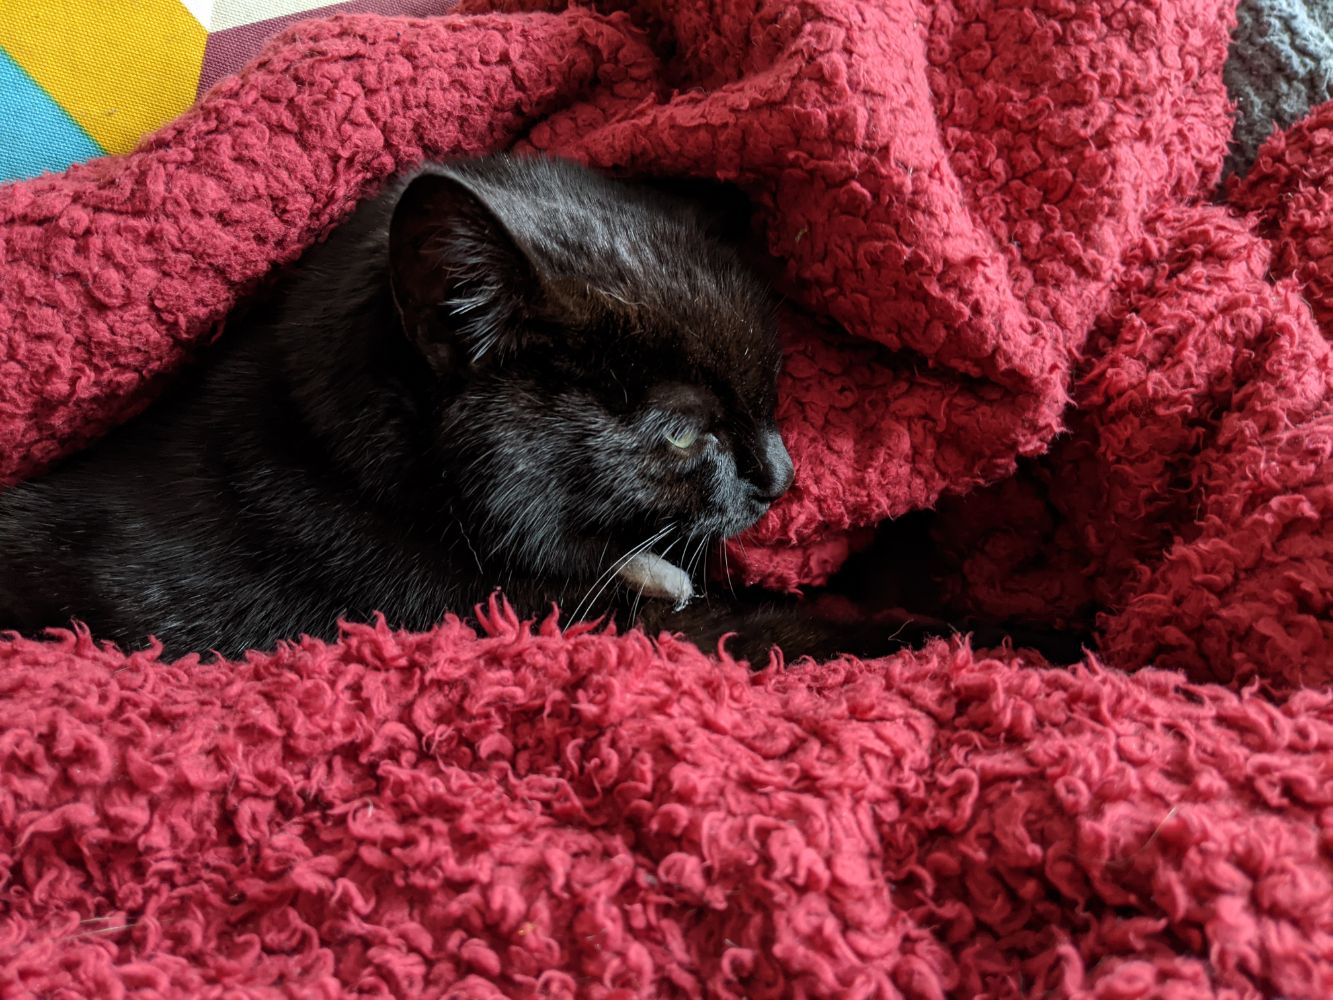 Black cat with his head visible in a gap in the red blanket wrapped all around him